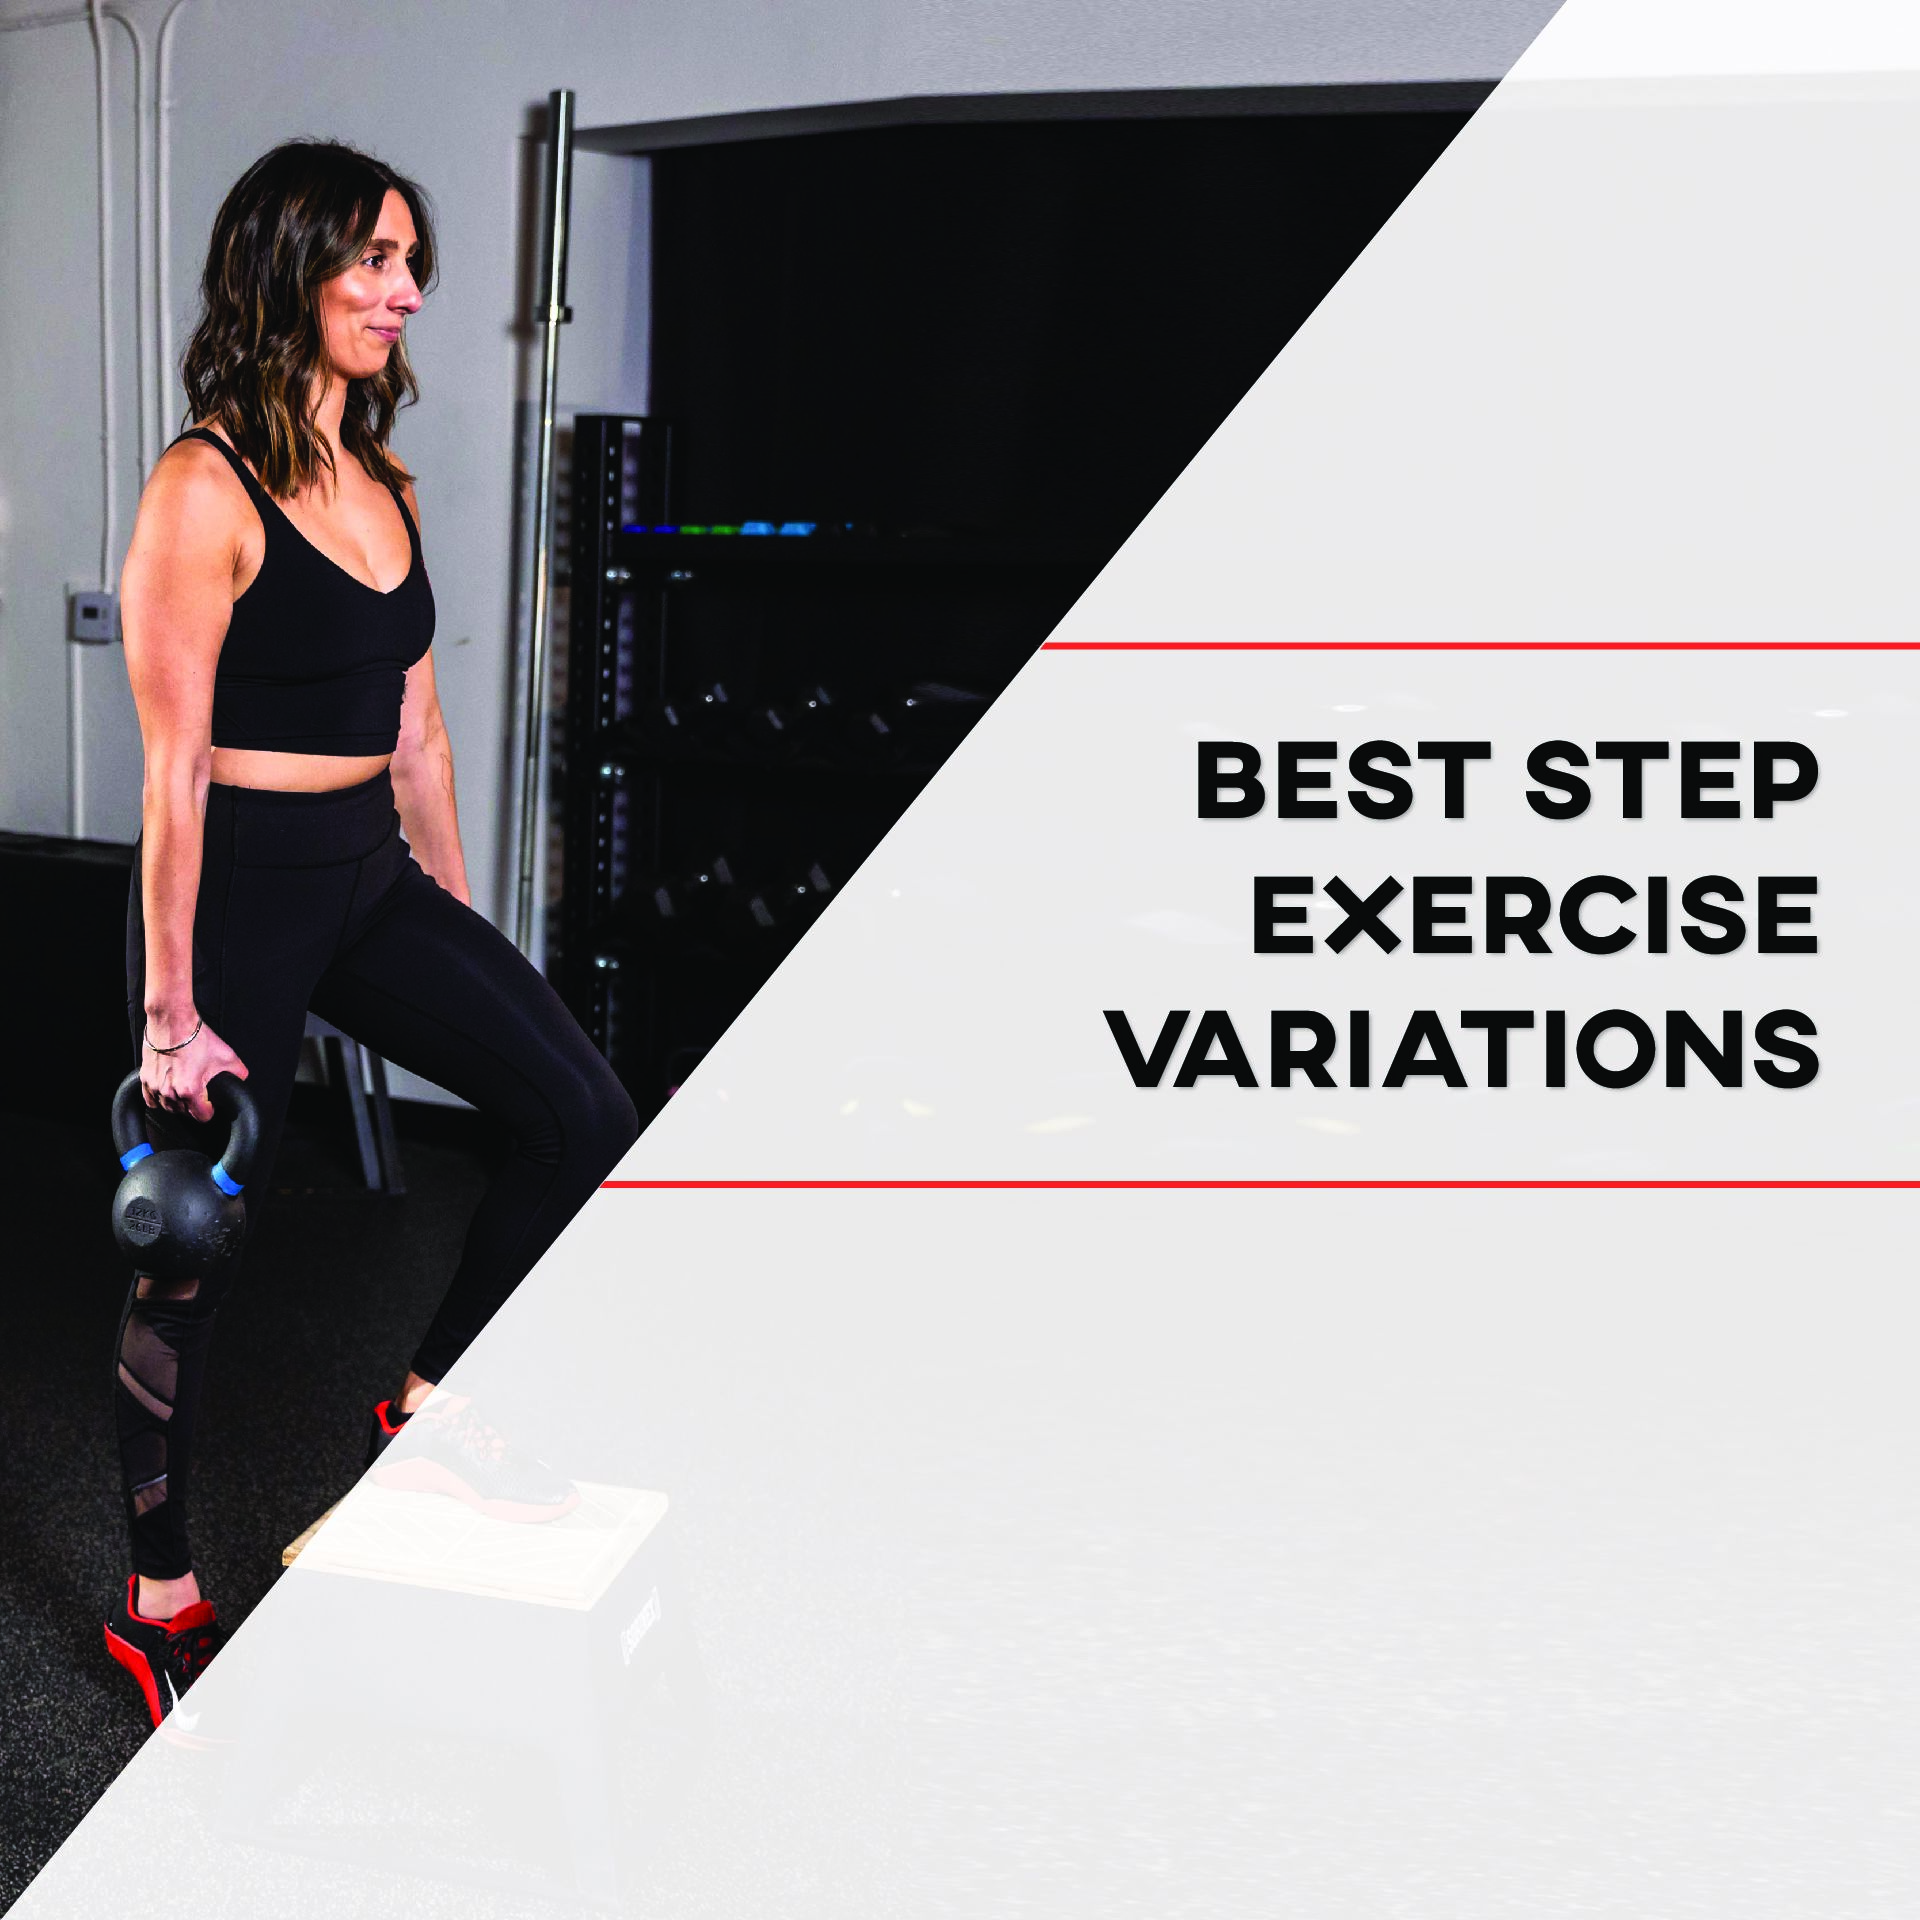 Step up your strength and balance with this stair workout